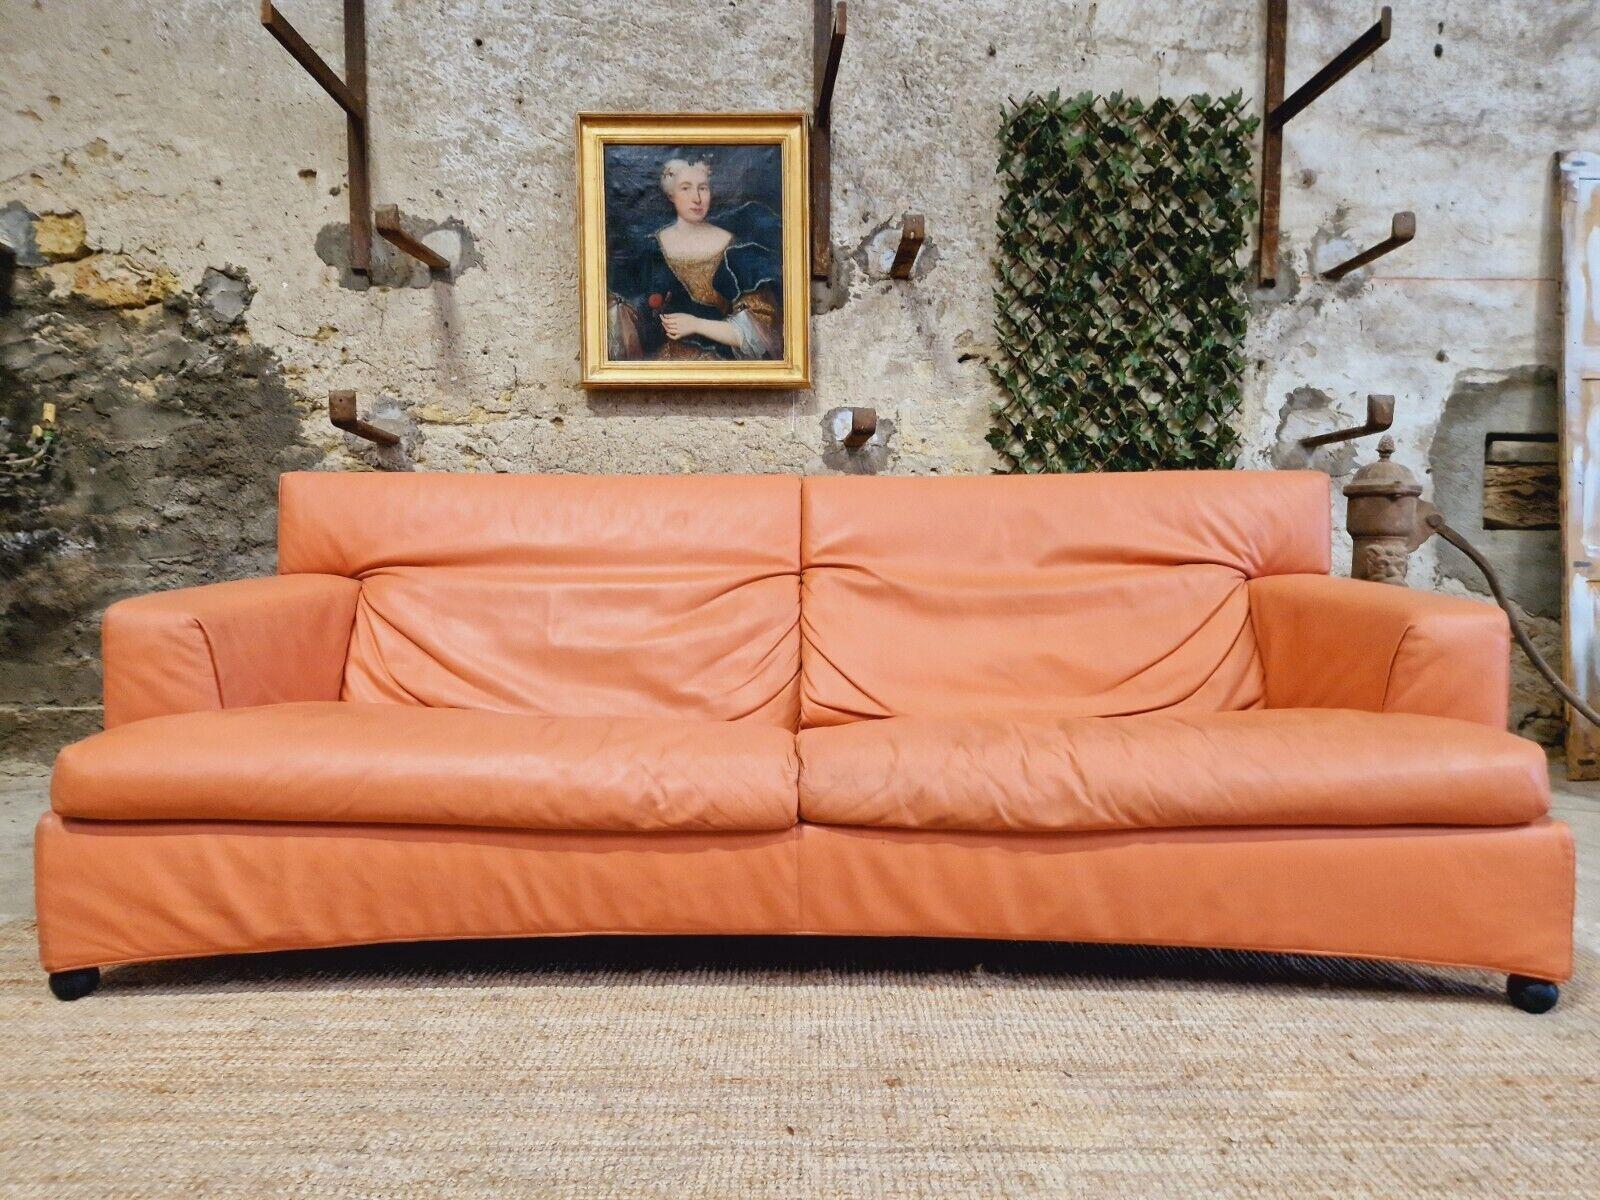 ROCAILLE ANTIQUES

Experience the allure of vintage Italian design with this stunning Paolo Piva pink leather sofa. Crafted in Italy with a solid pattern and sleek modern back style, this vintage piece is a must-have for anyone looking to add a